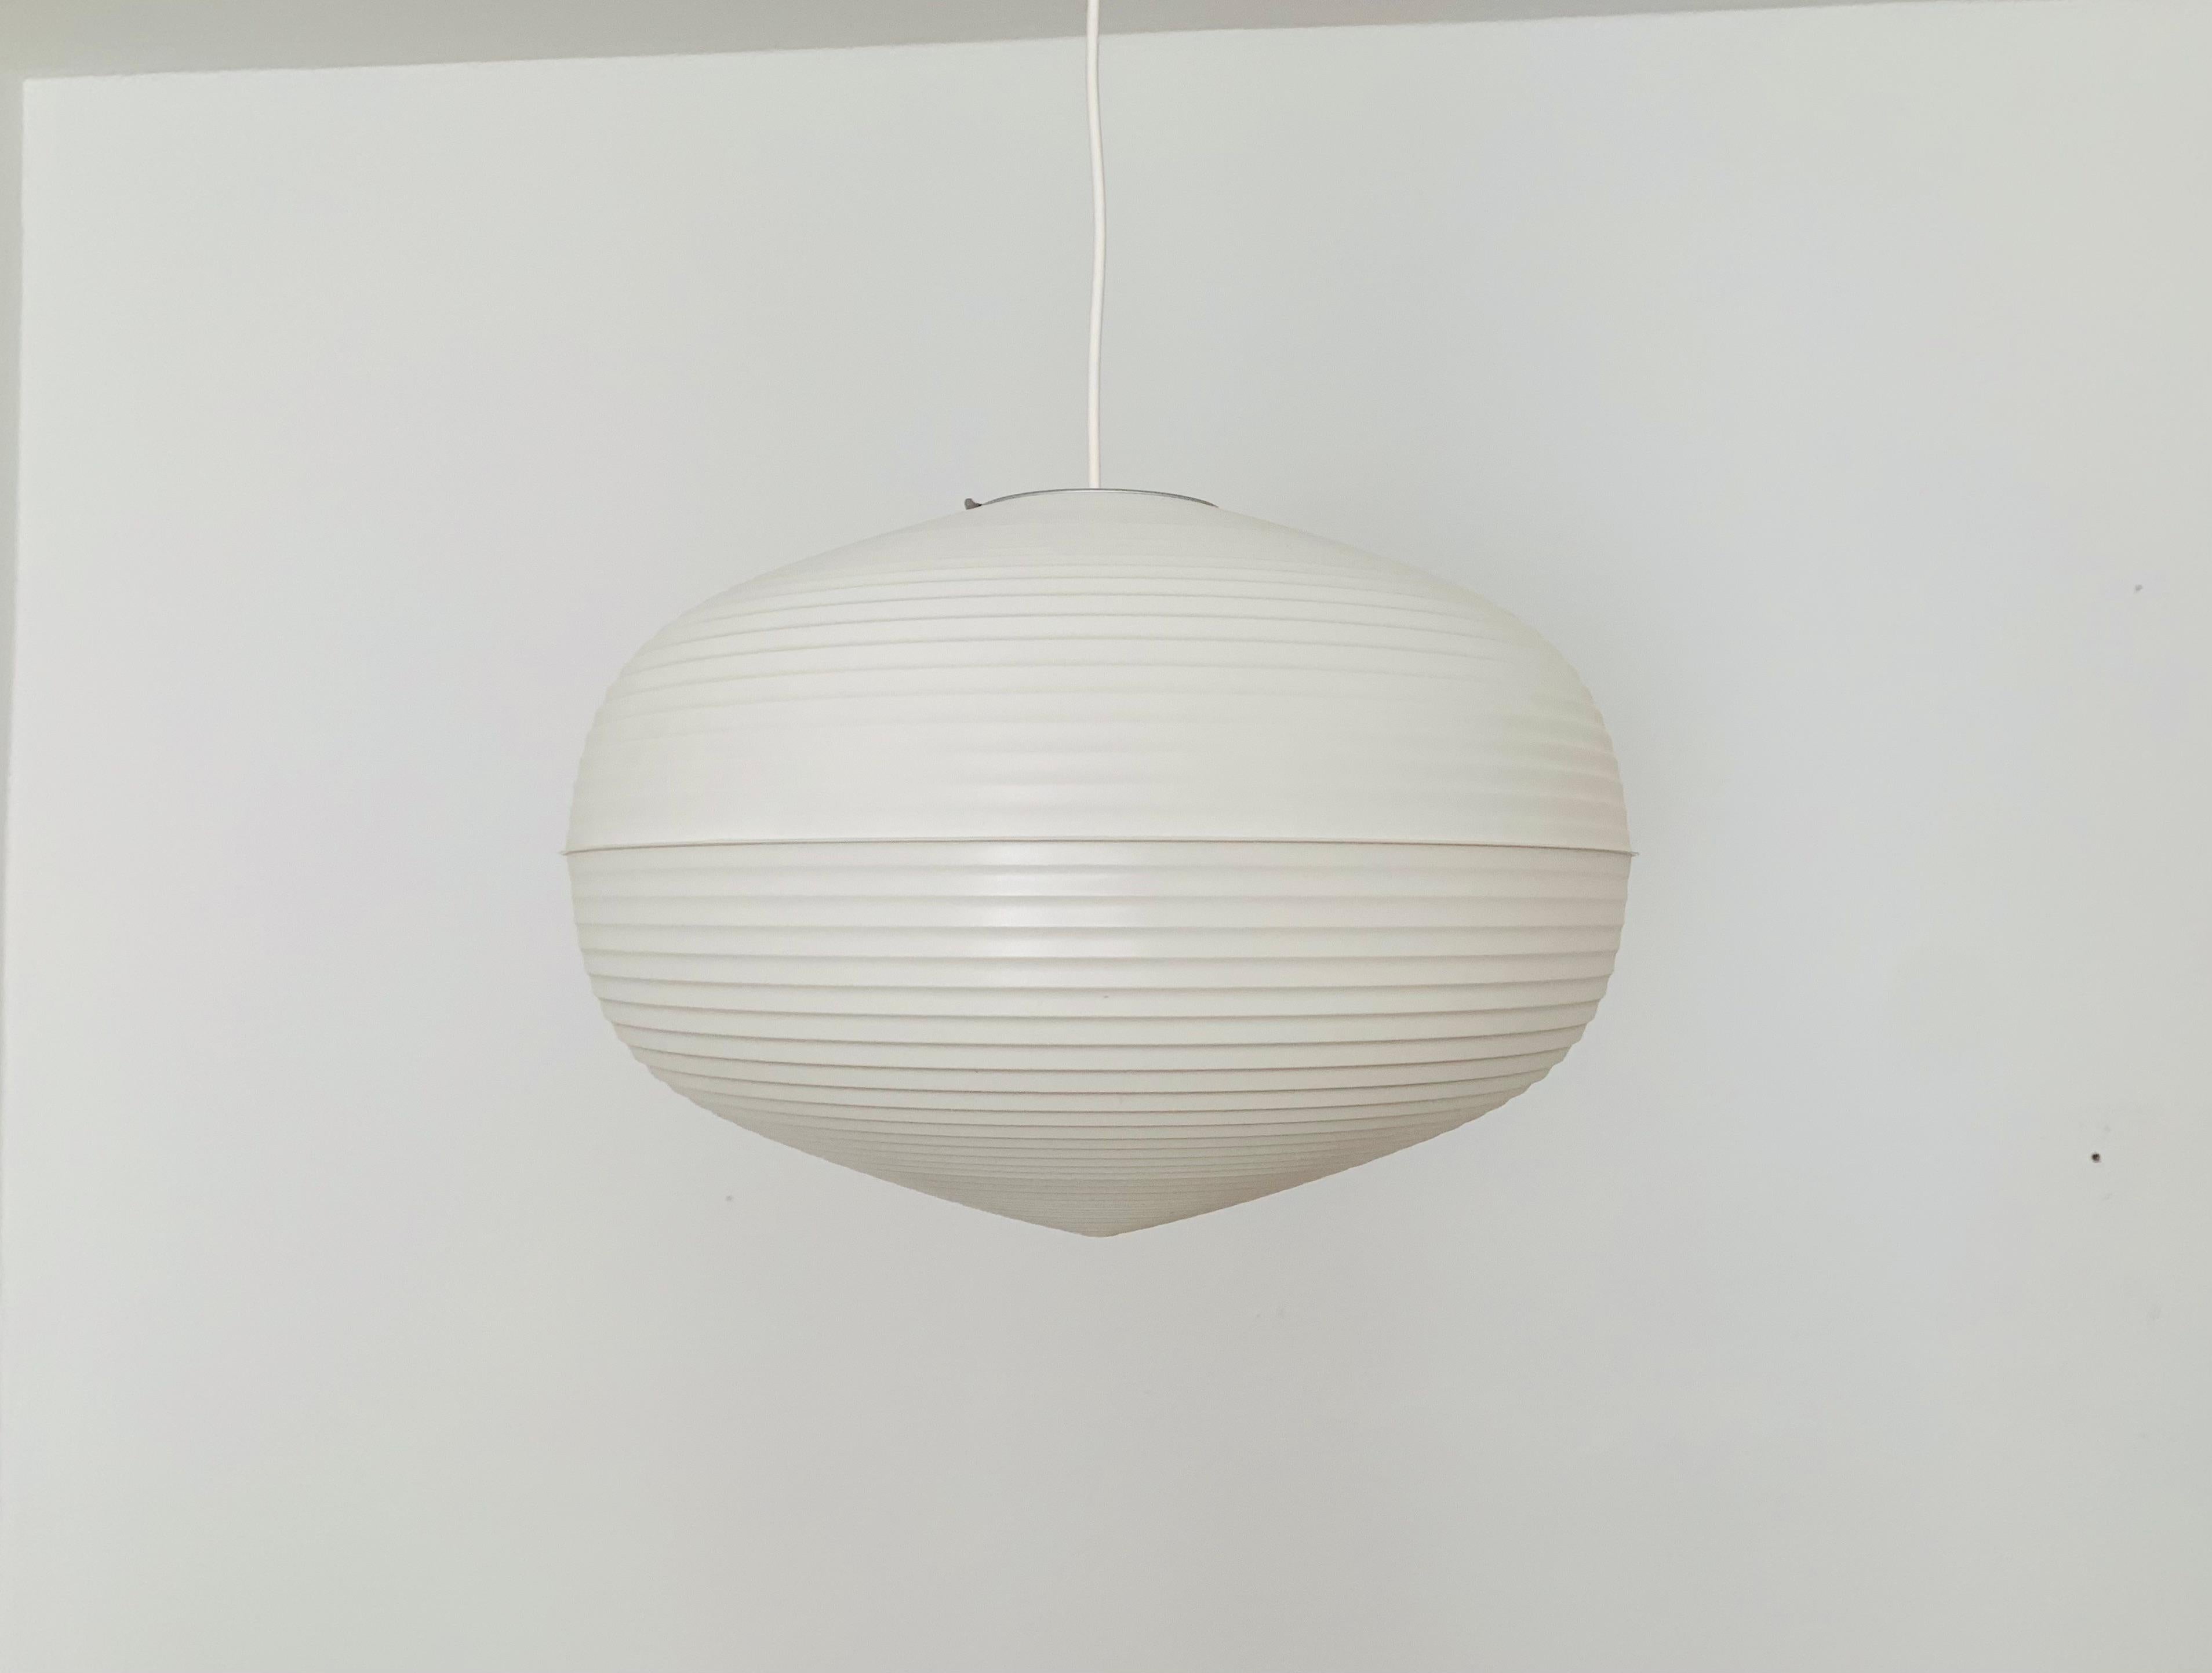 Very nice pendant lamp from the 1960s.
Wonderful and contemporary design.
A highlight for every room.

Manufacturer: Erco
Design: Aloys Gangkofner

Condition:

Very good vintage condition with minimal signs of wear consistent with